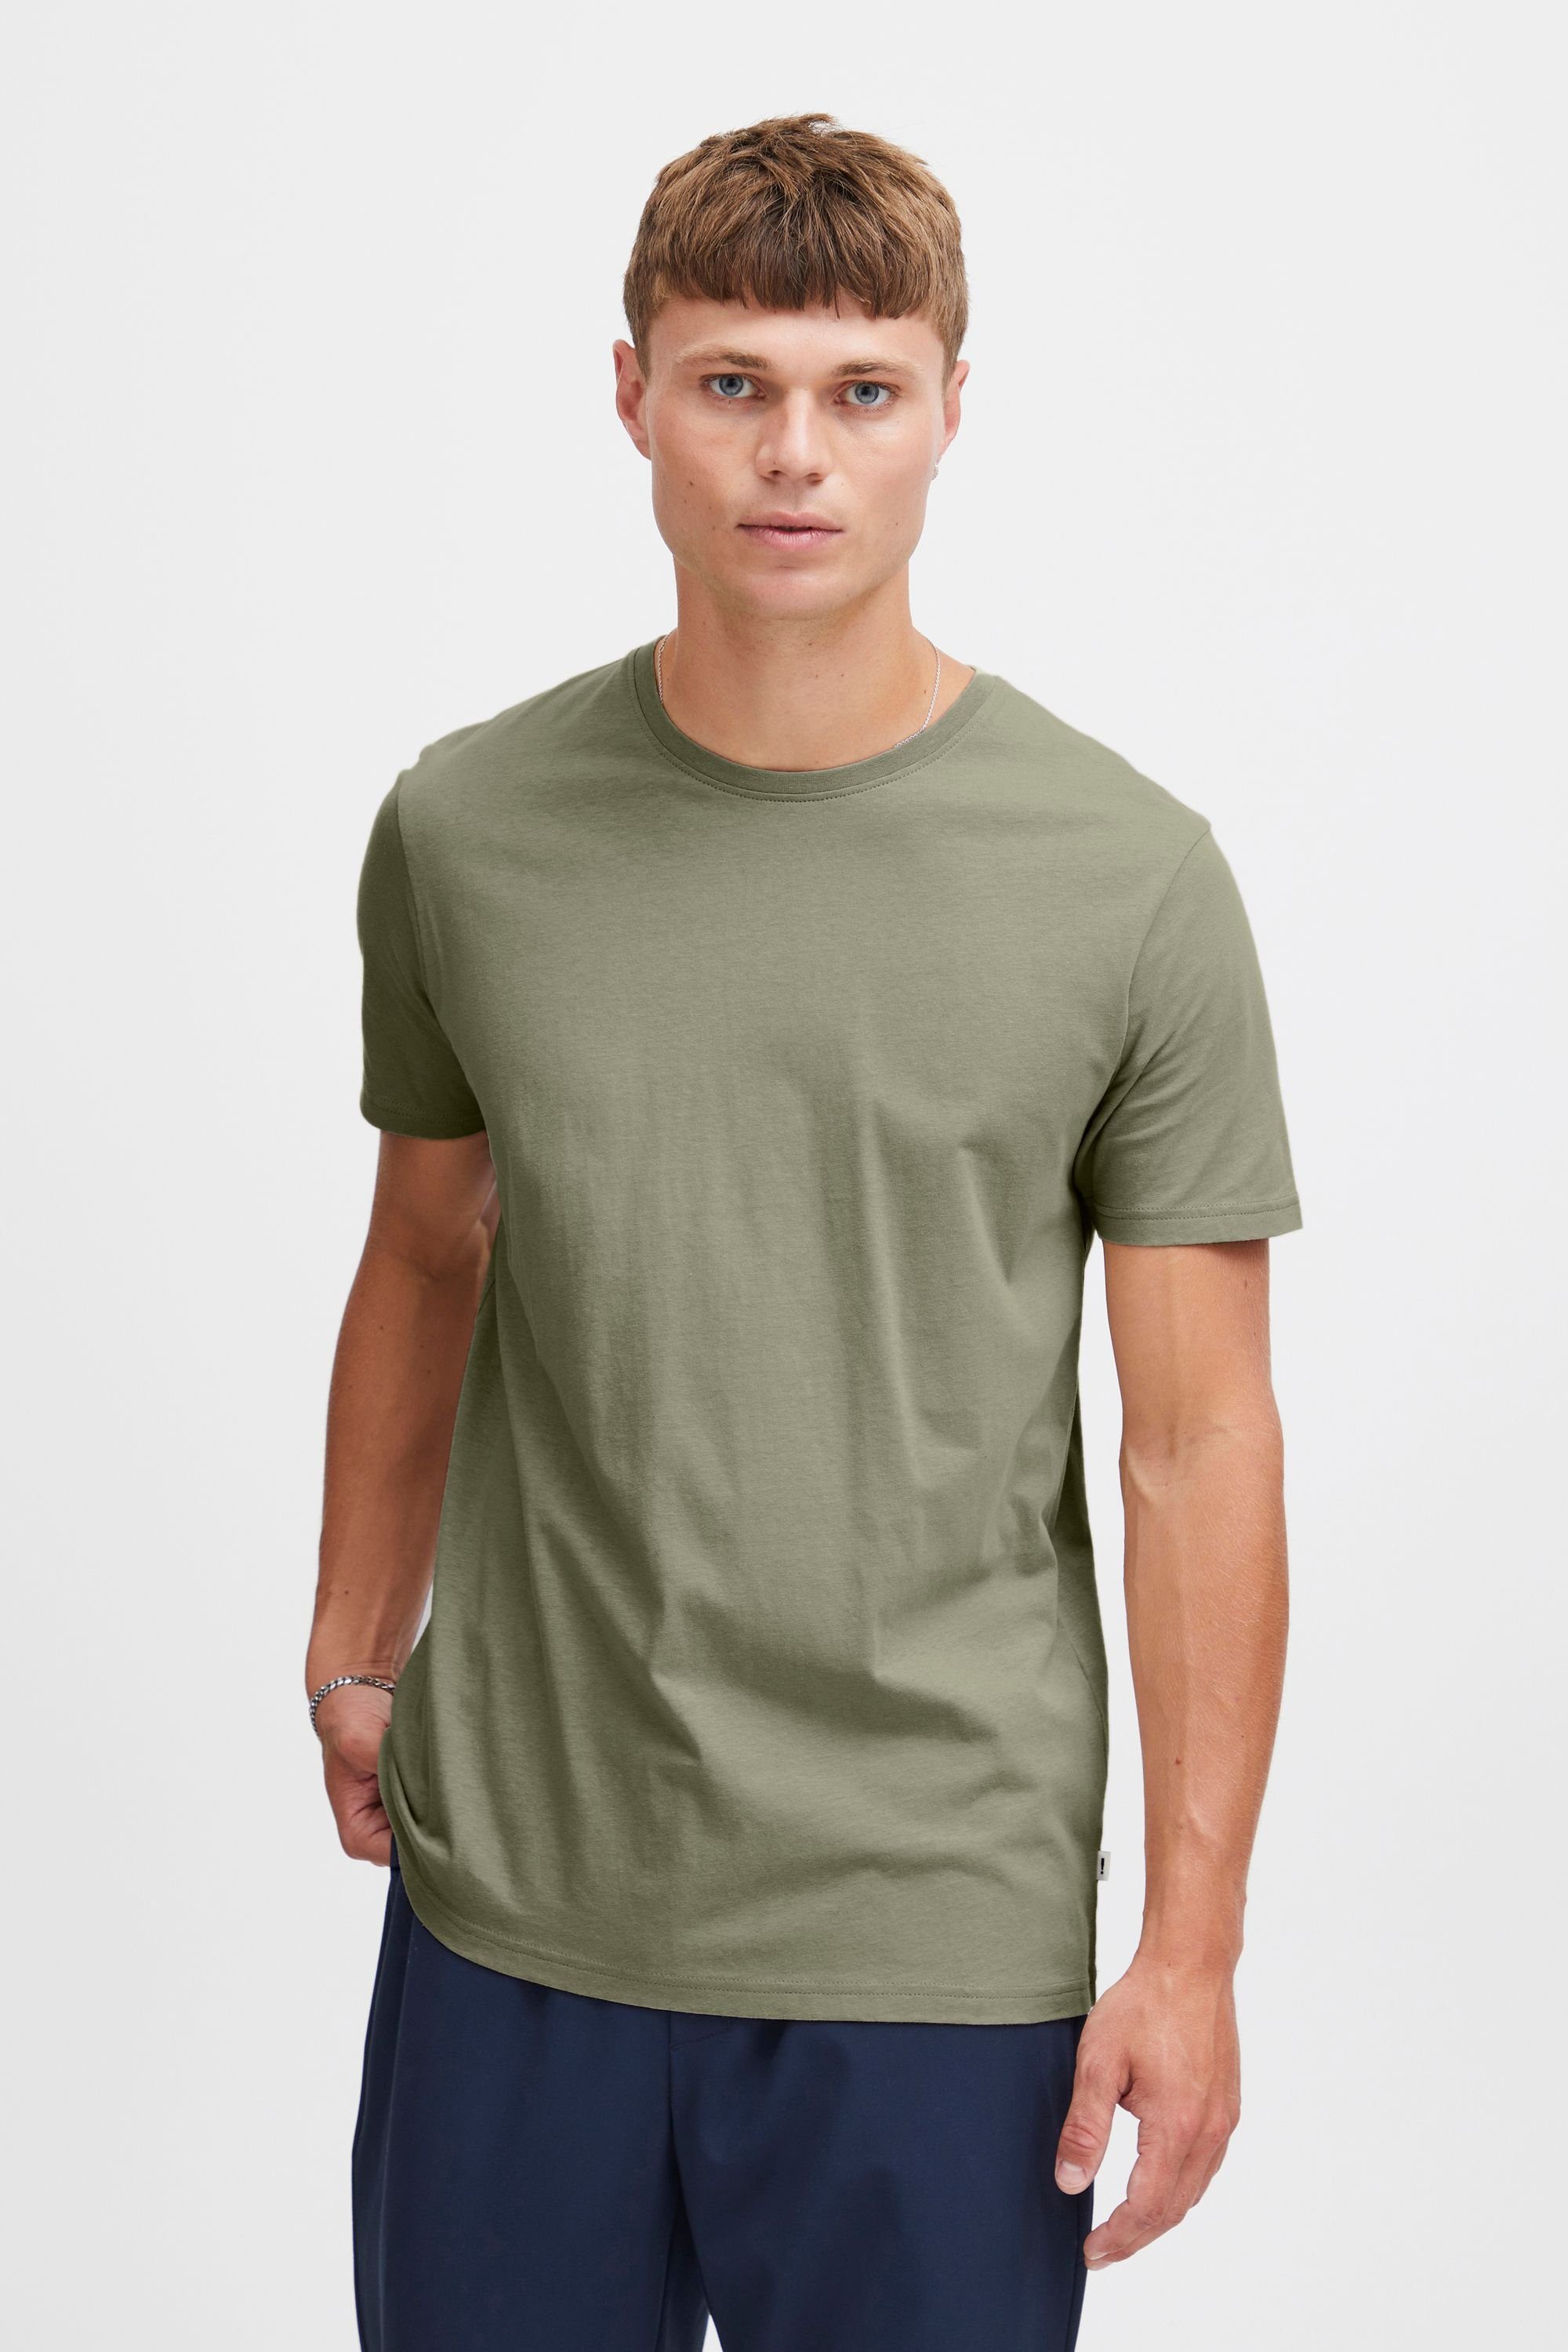 Rock SS Vetiver - T-Shirt - 21103651 (170613) !Solid 6194761, Tee